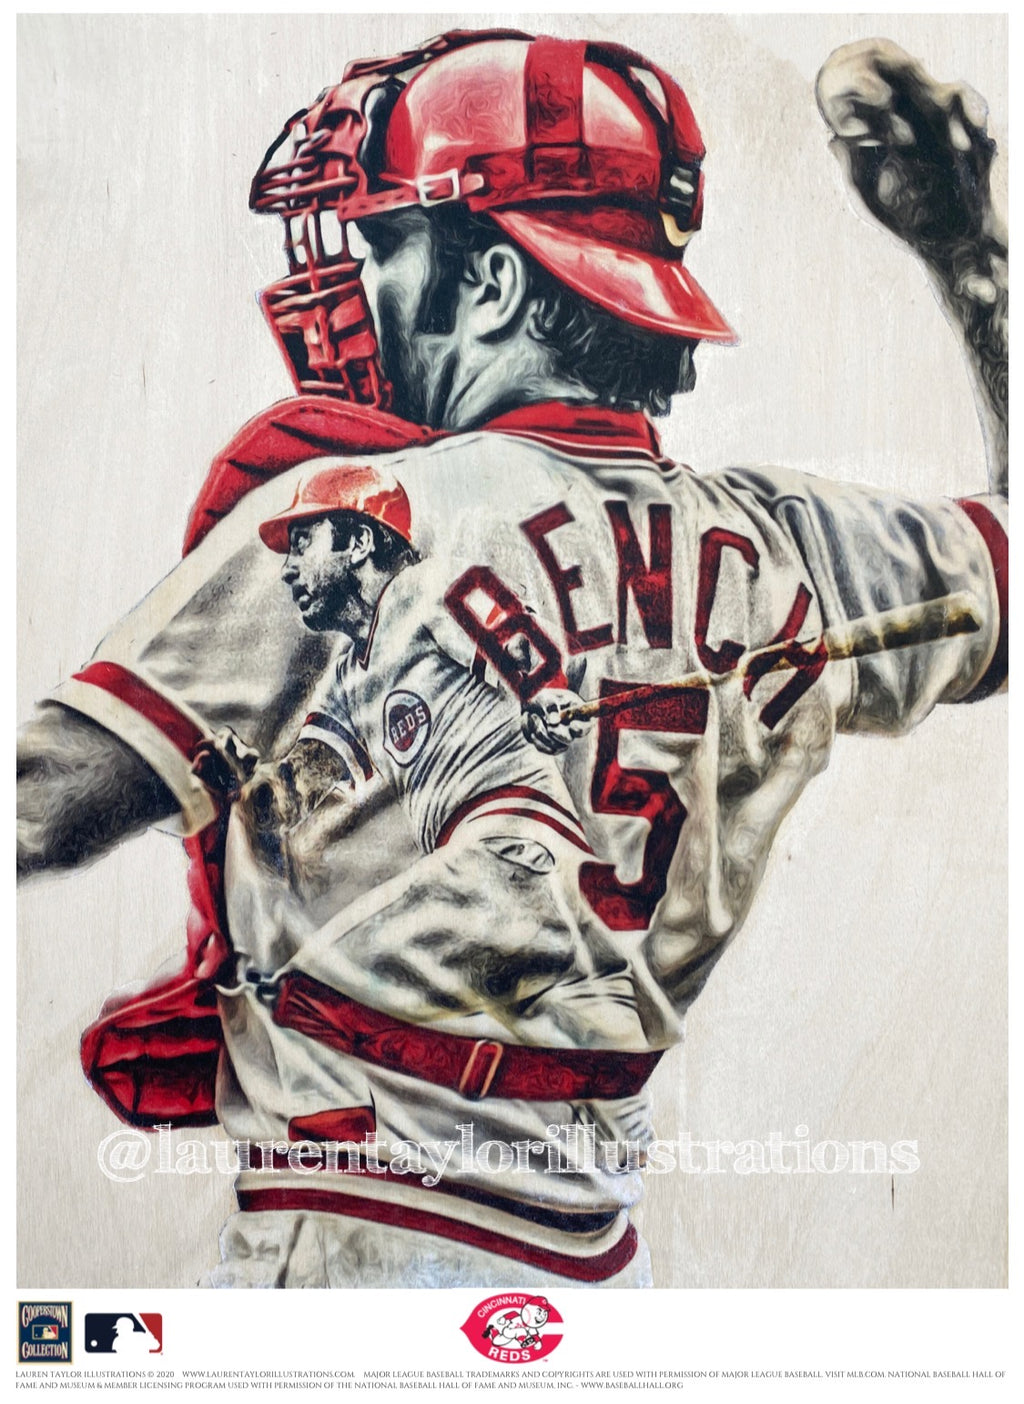 "Little General" (Johnny Bench) Cincinnati Reds - Officially Licensed MLB Cooperstown Collection Print - Limited Release